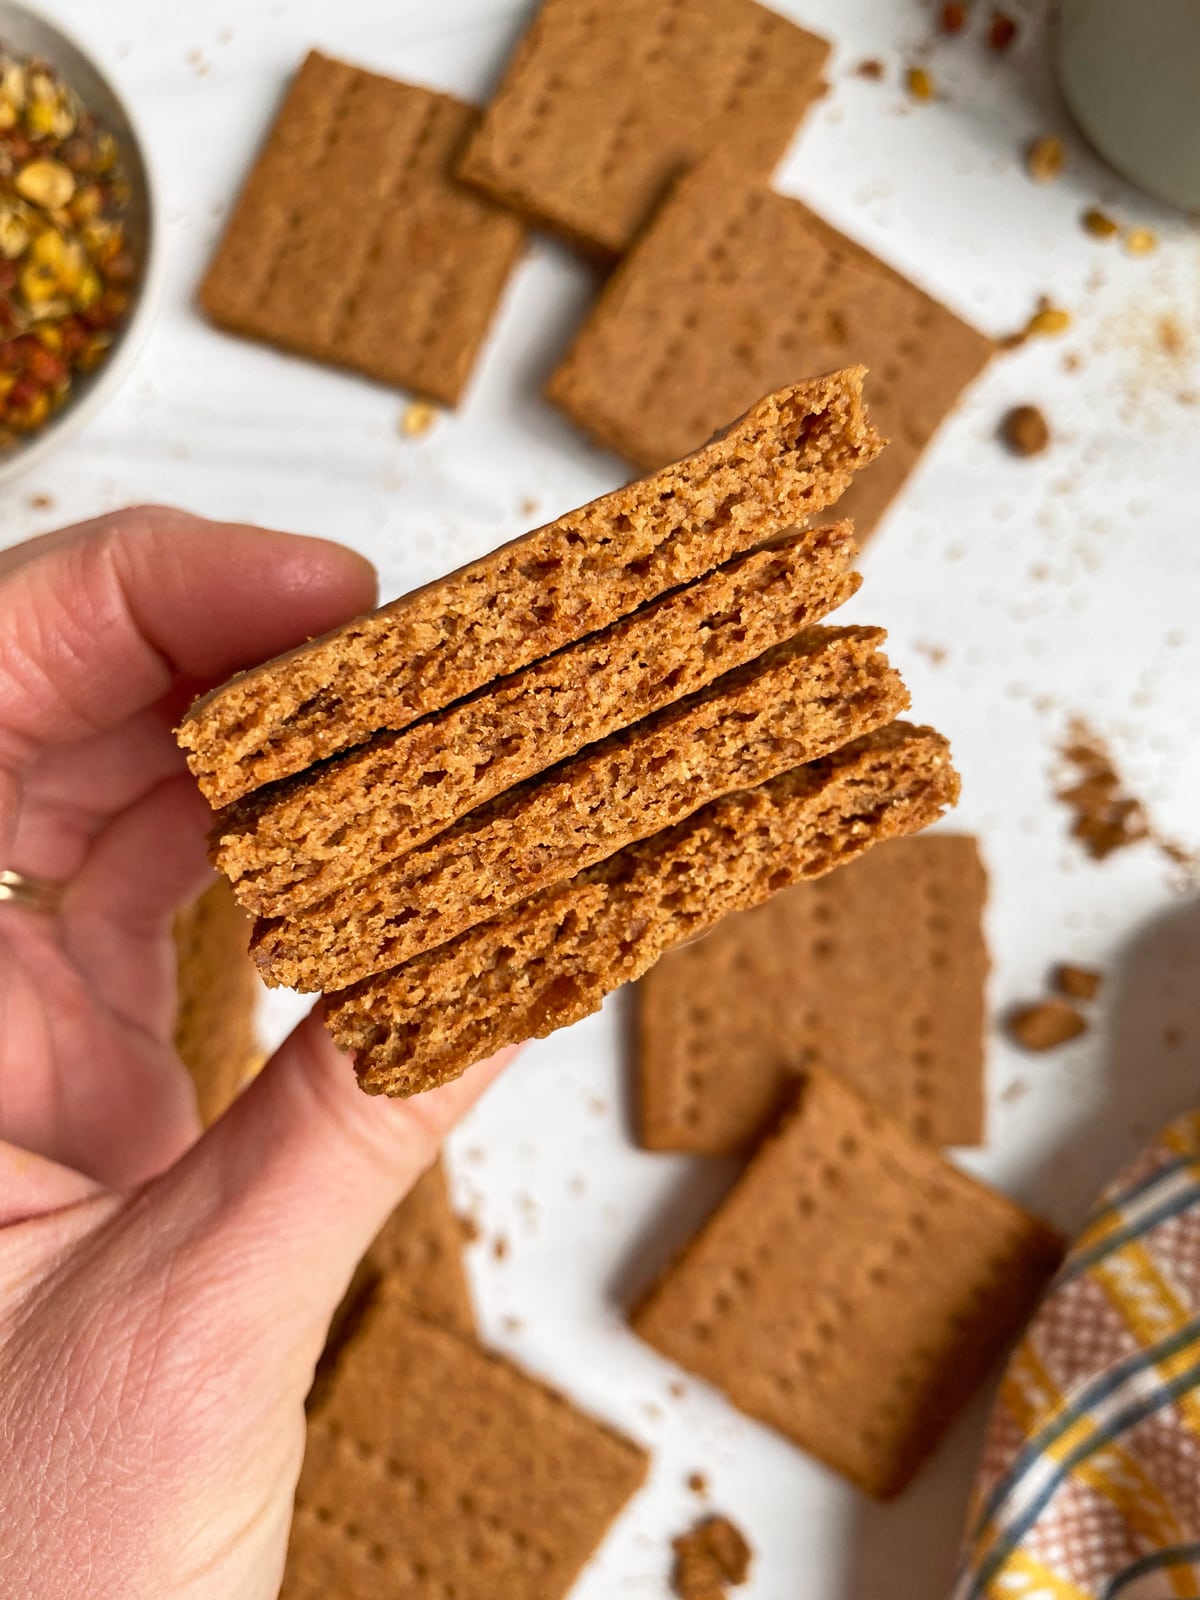 holding graham crackers to show the inner texture